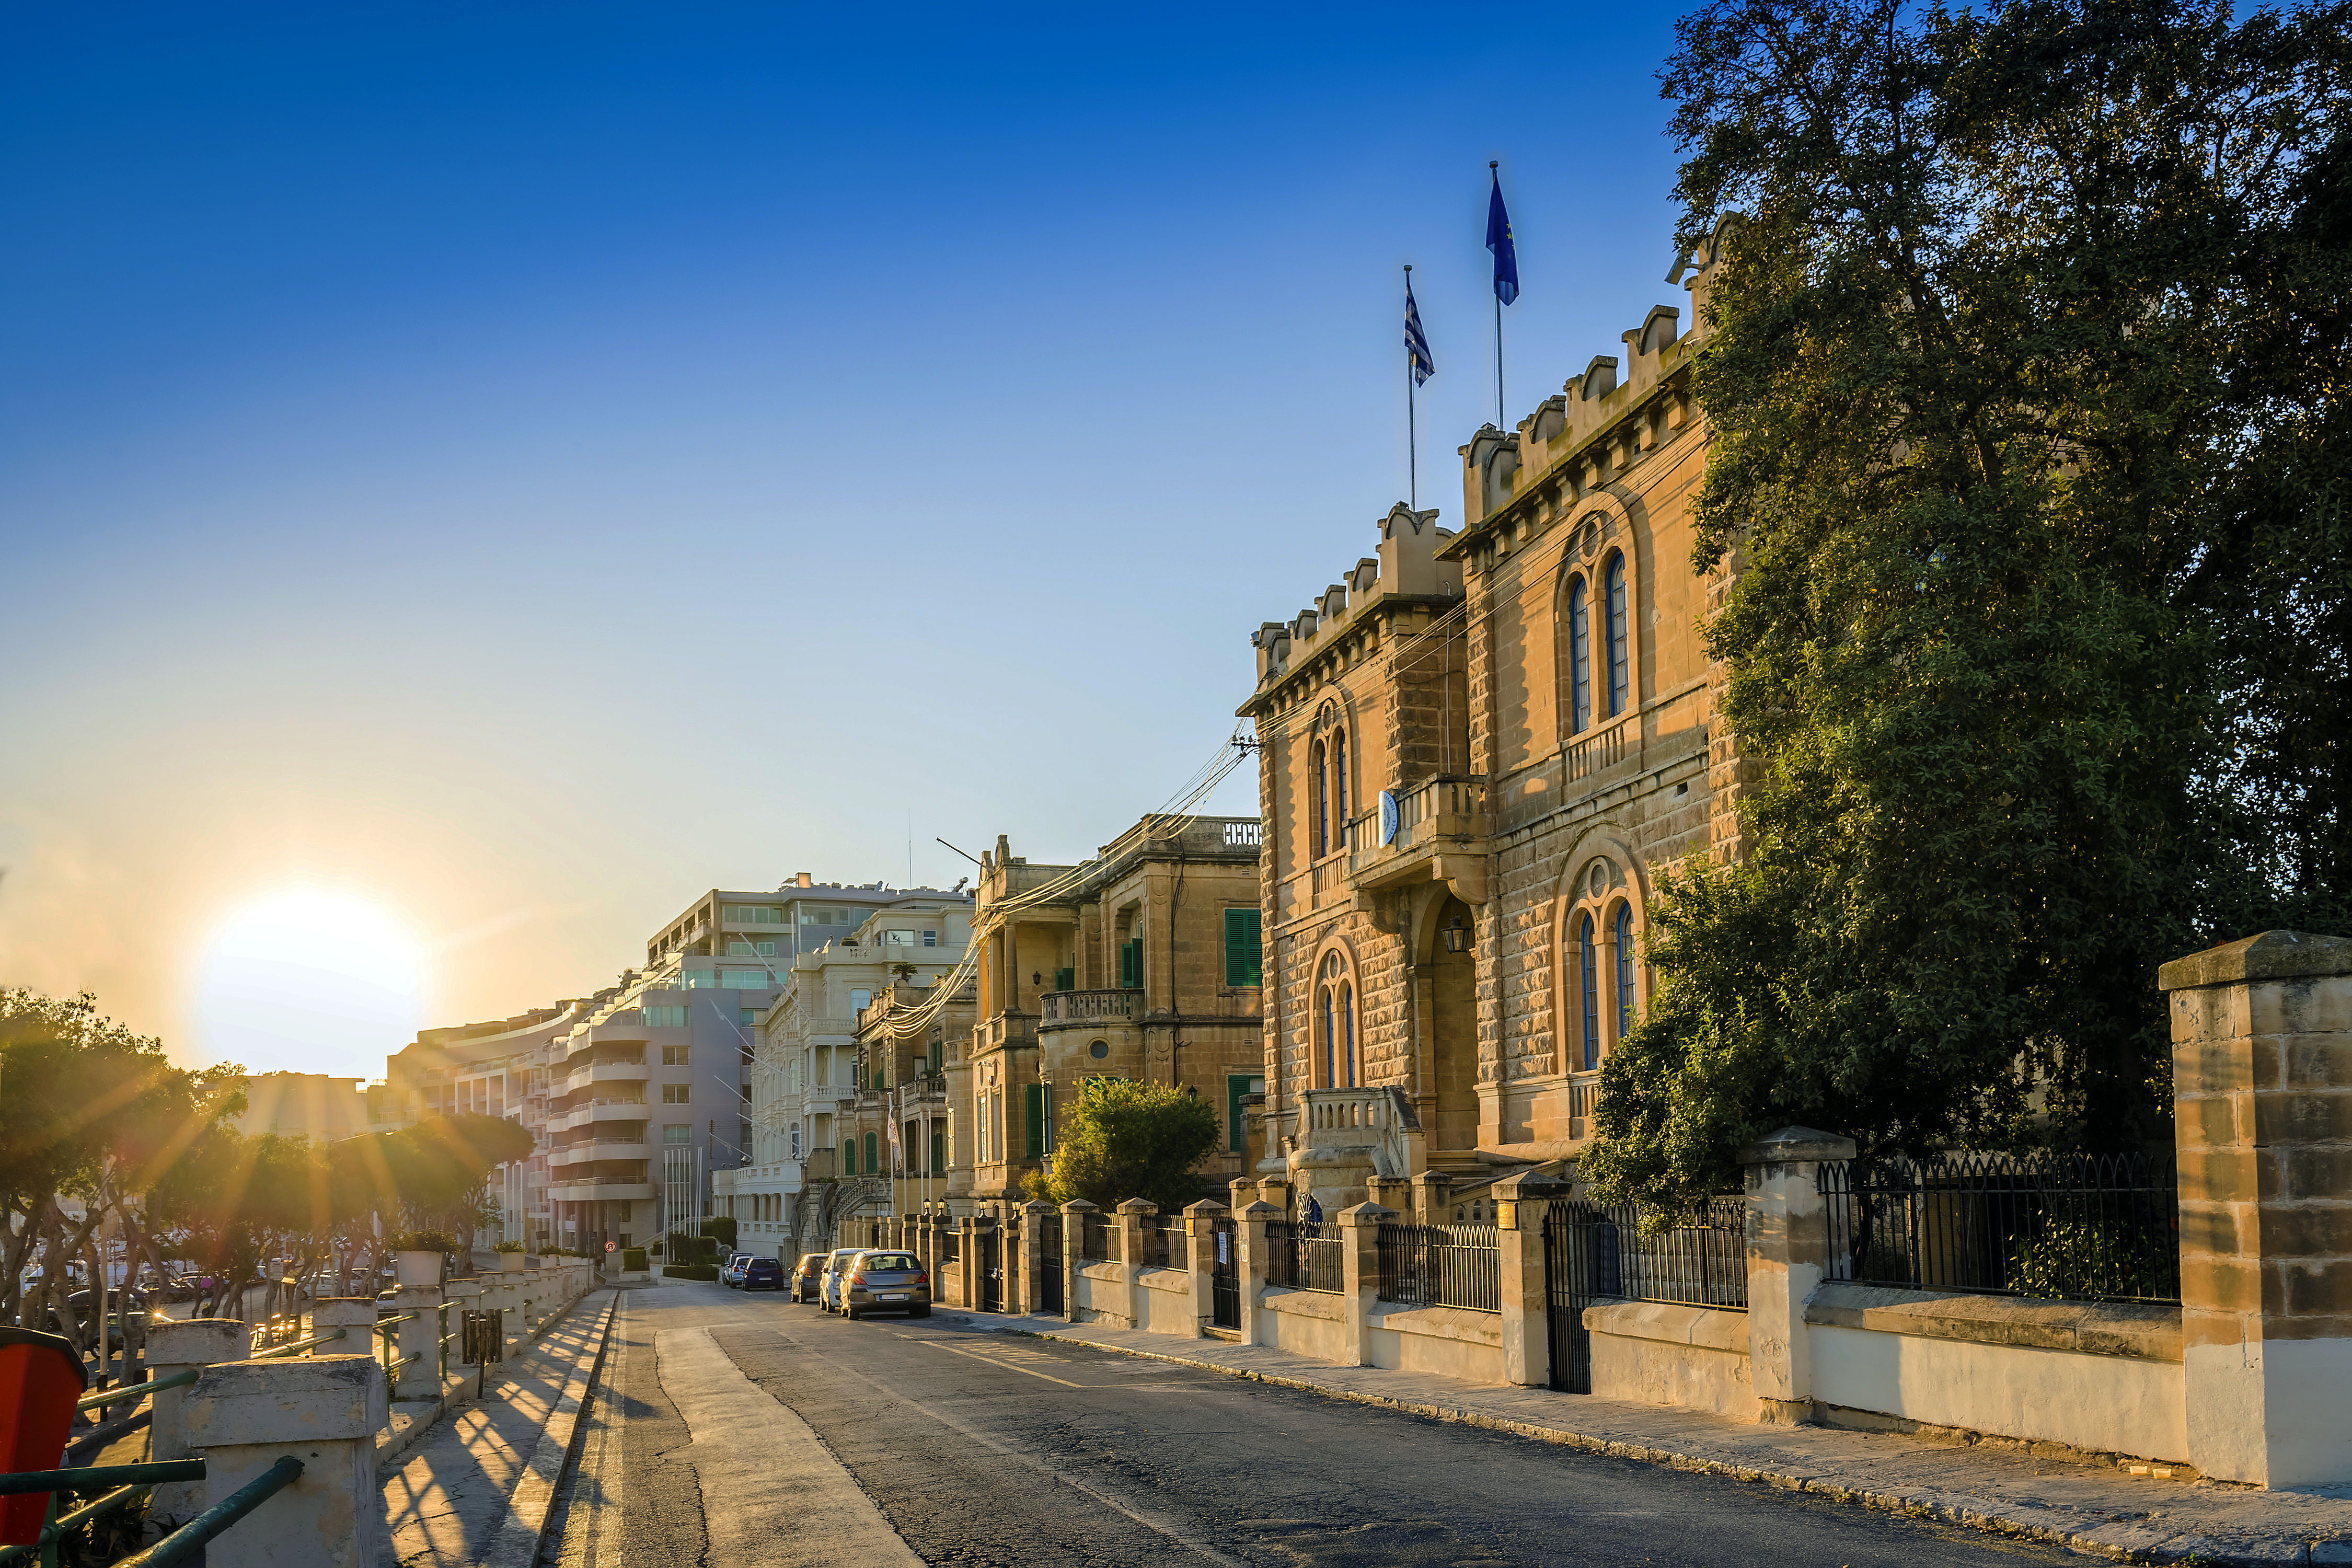 Sunset at the old streets of Msida in the Central region of Malta